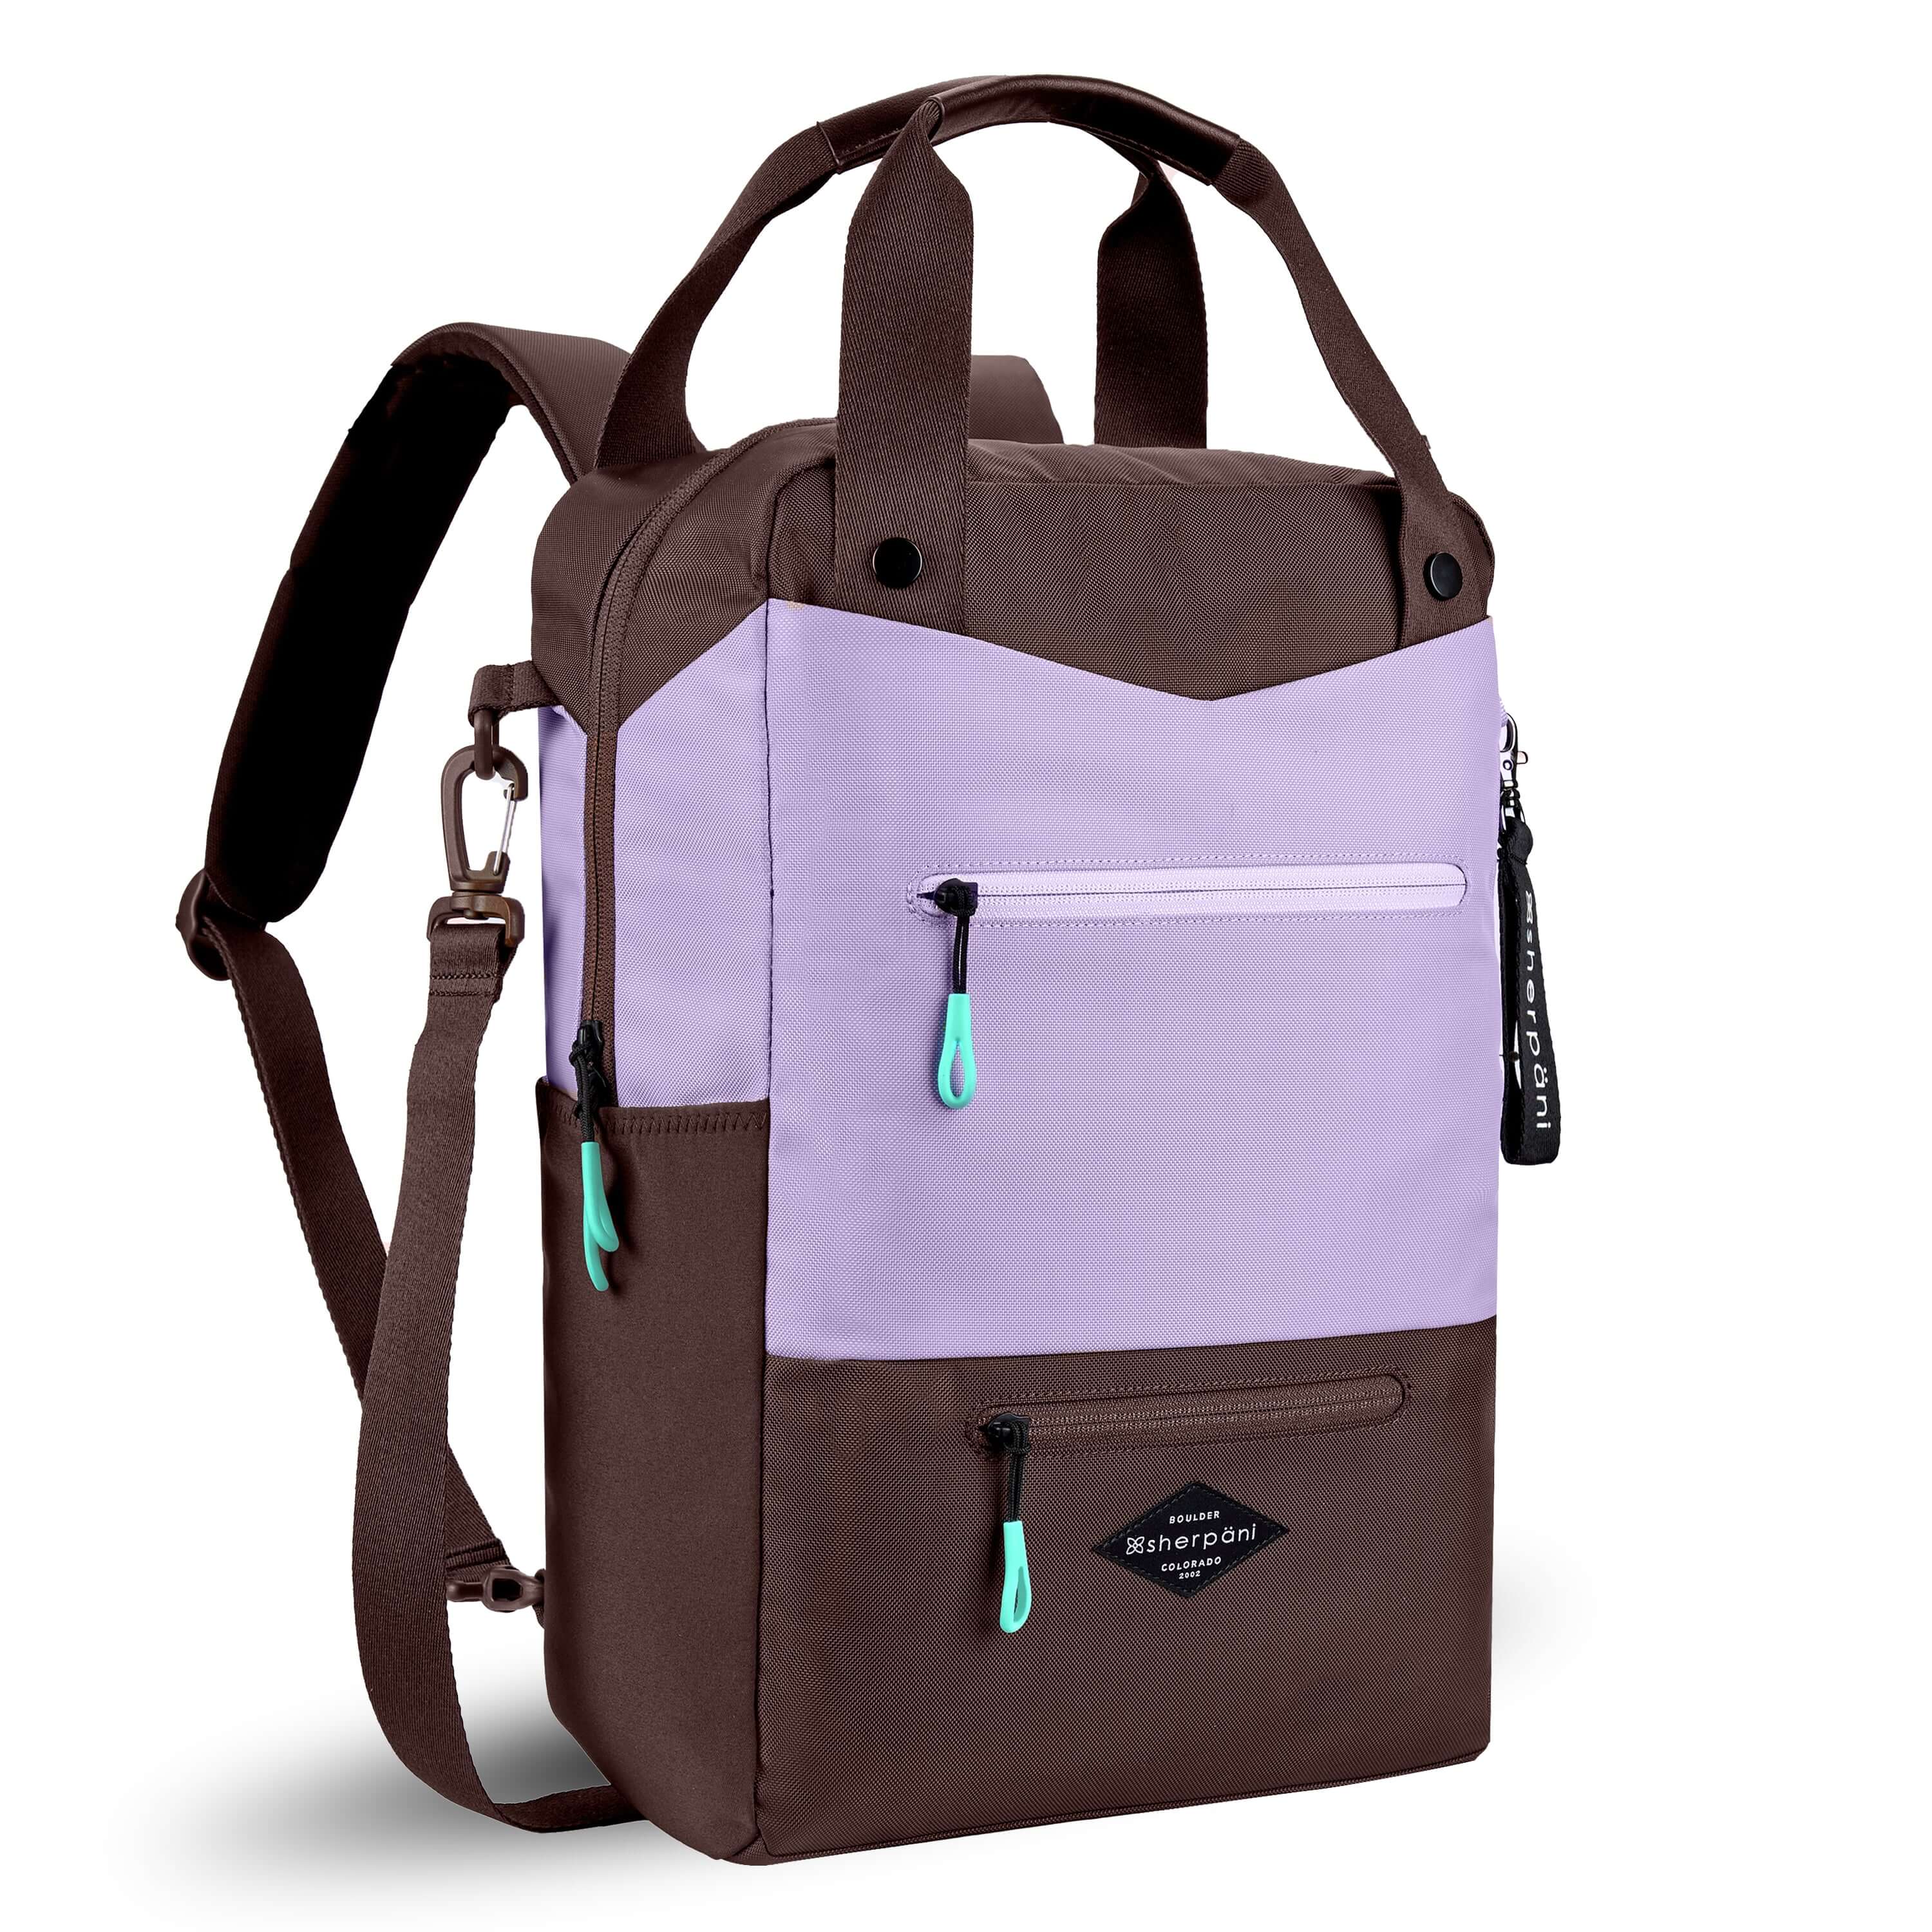 Angled front view of Sherpani's three-in-one bag, the Camden in Lavender. The bag is two-toned in lavender and brown. There are two external zipper pockets on the front panel with easy-pull zippers in aqua. A branded Sherpani keychain is clipped to the upper right corner. An elastic water bottle holder sits on either side of the bag. The bag has an adjustable/detachable crossbody strap, padded/adjustable backpack straps and short tote handles fixed at the top. #color_lavender